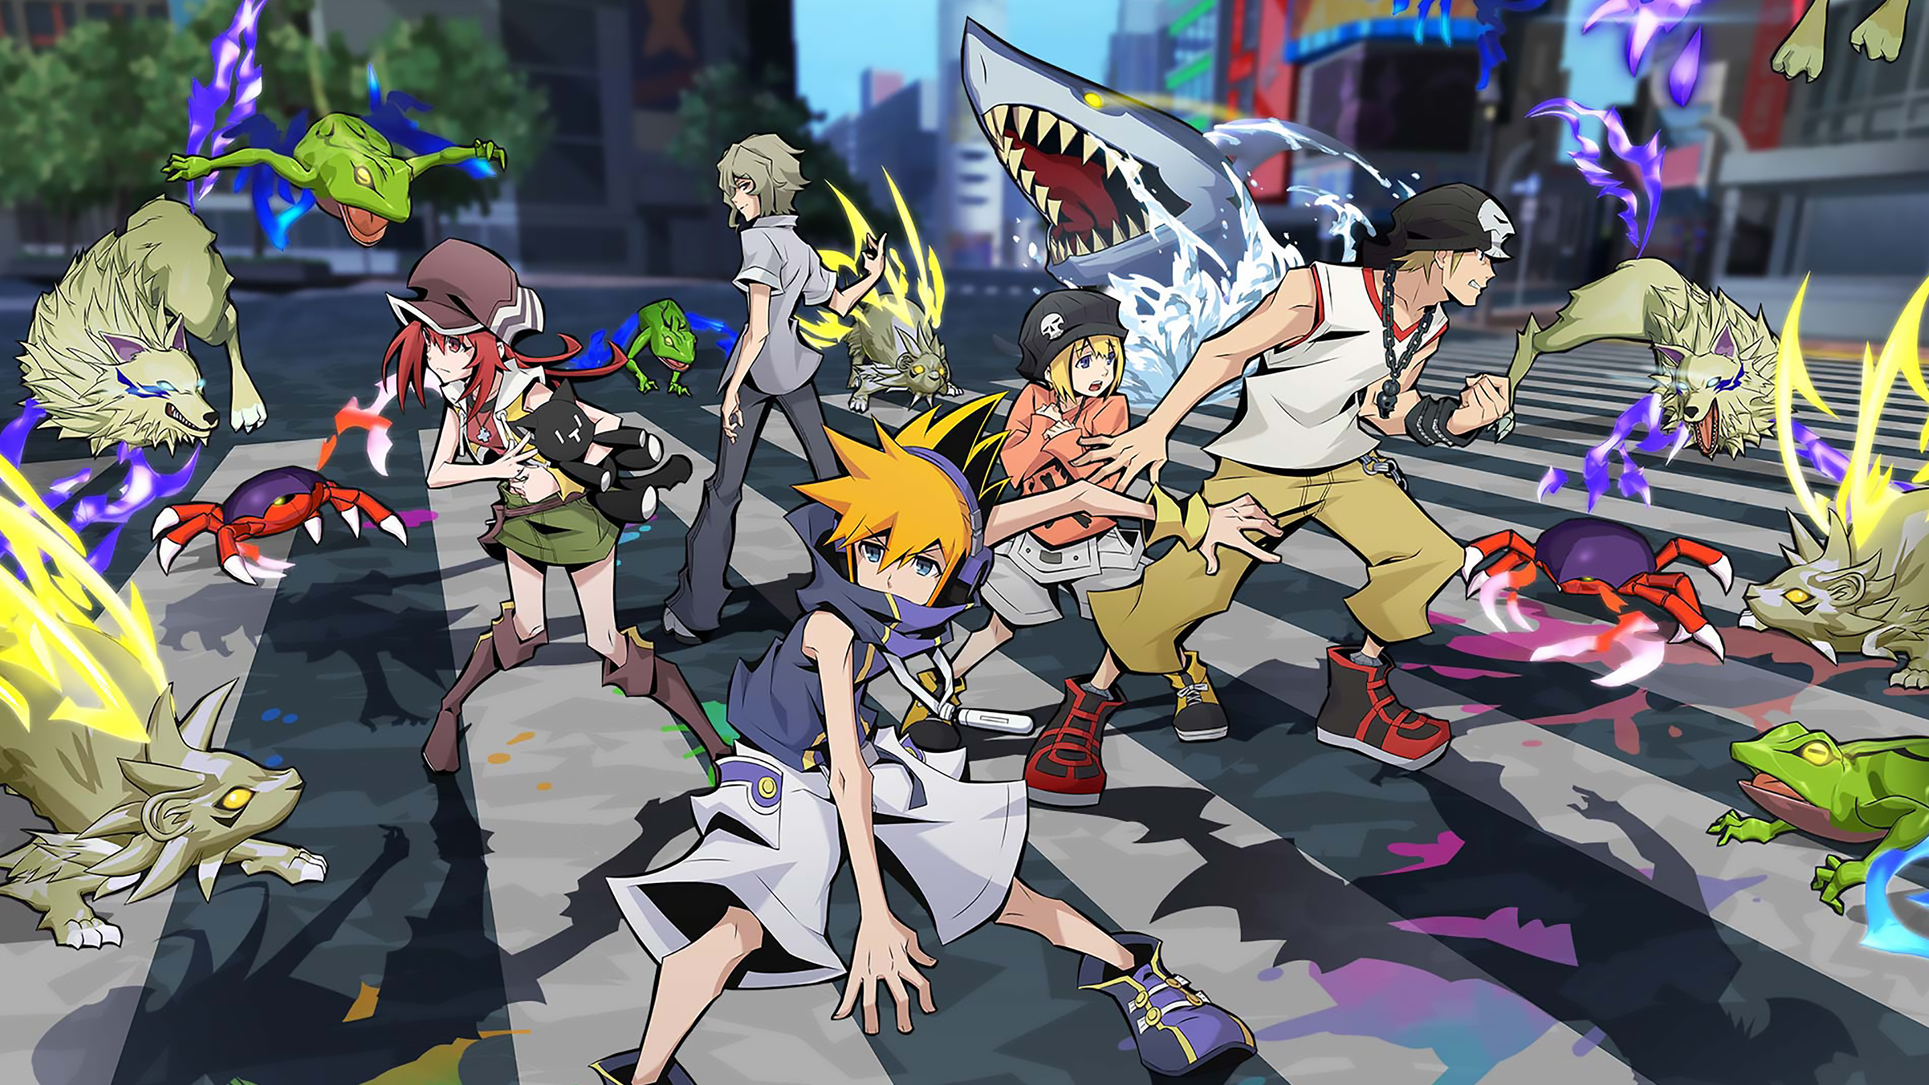 The World Ends With You Animation Promo Art #2 Wallpaper.